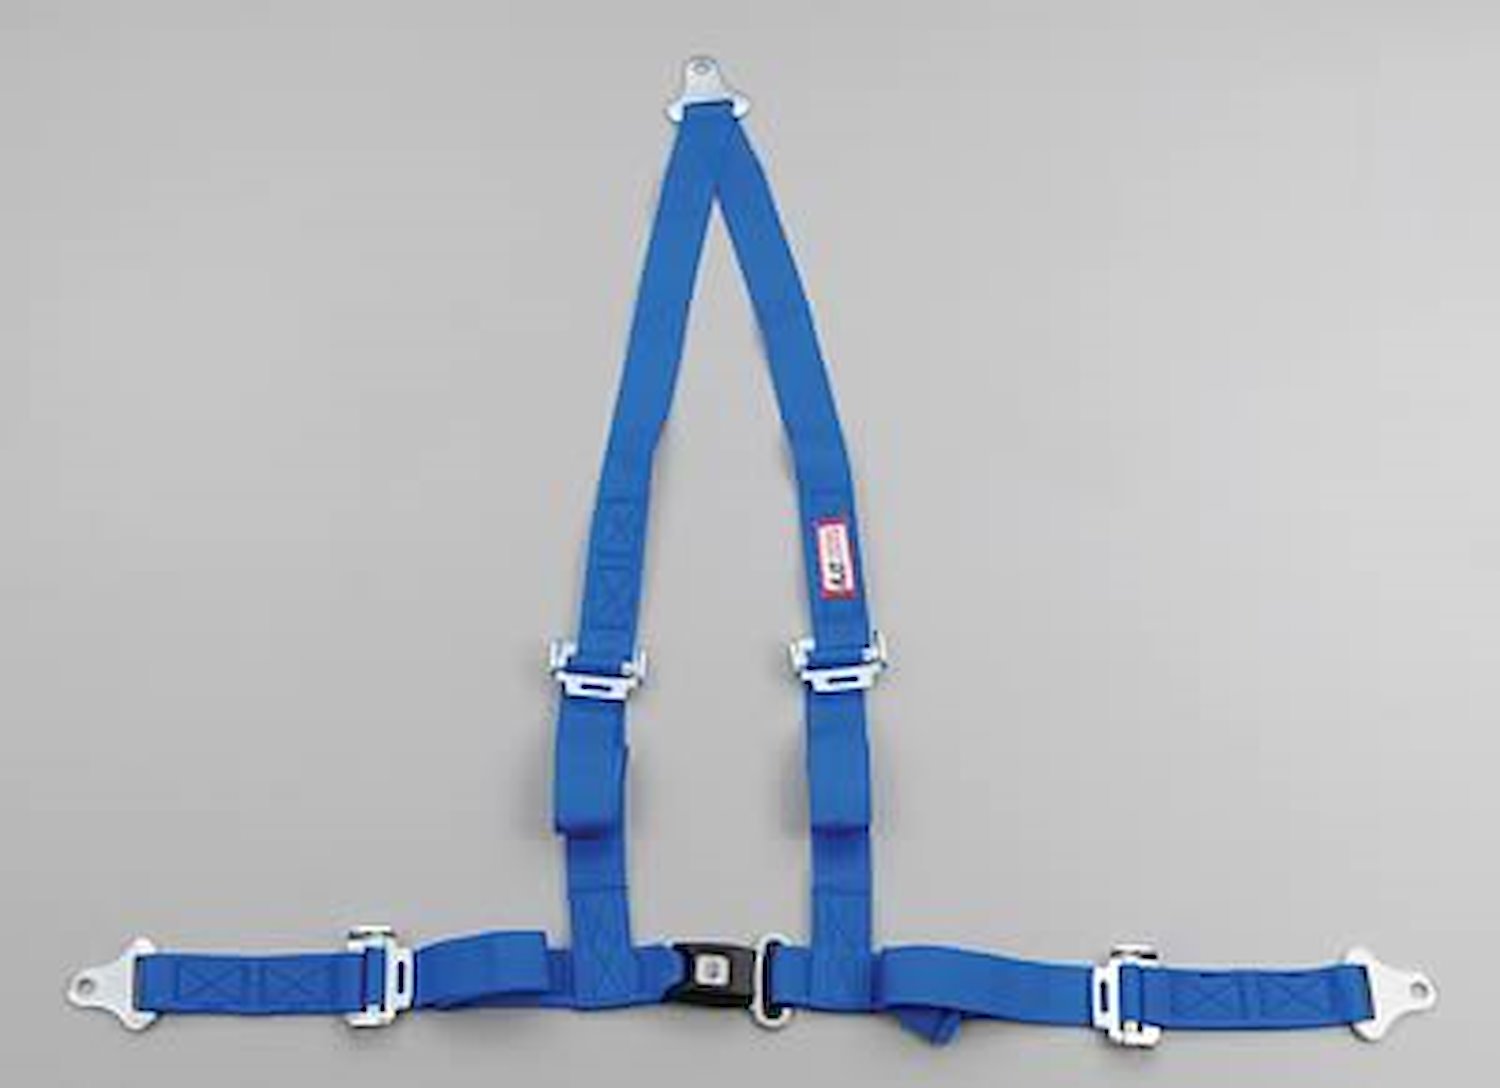 NON-SFI B&T HARNESS 2 PULL DOWN Lap Belt 2 S. H. Individual FLOOR Mount ALL WRAP ENDS w/STERNUM STRAP BLUE